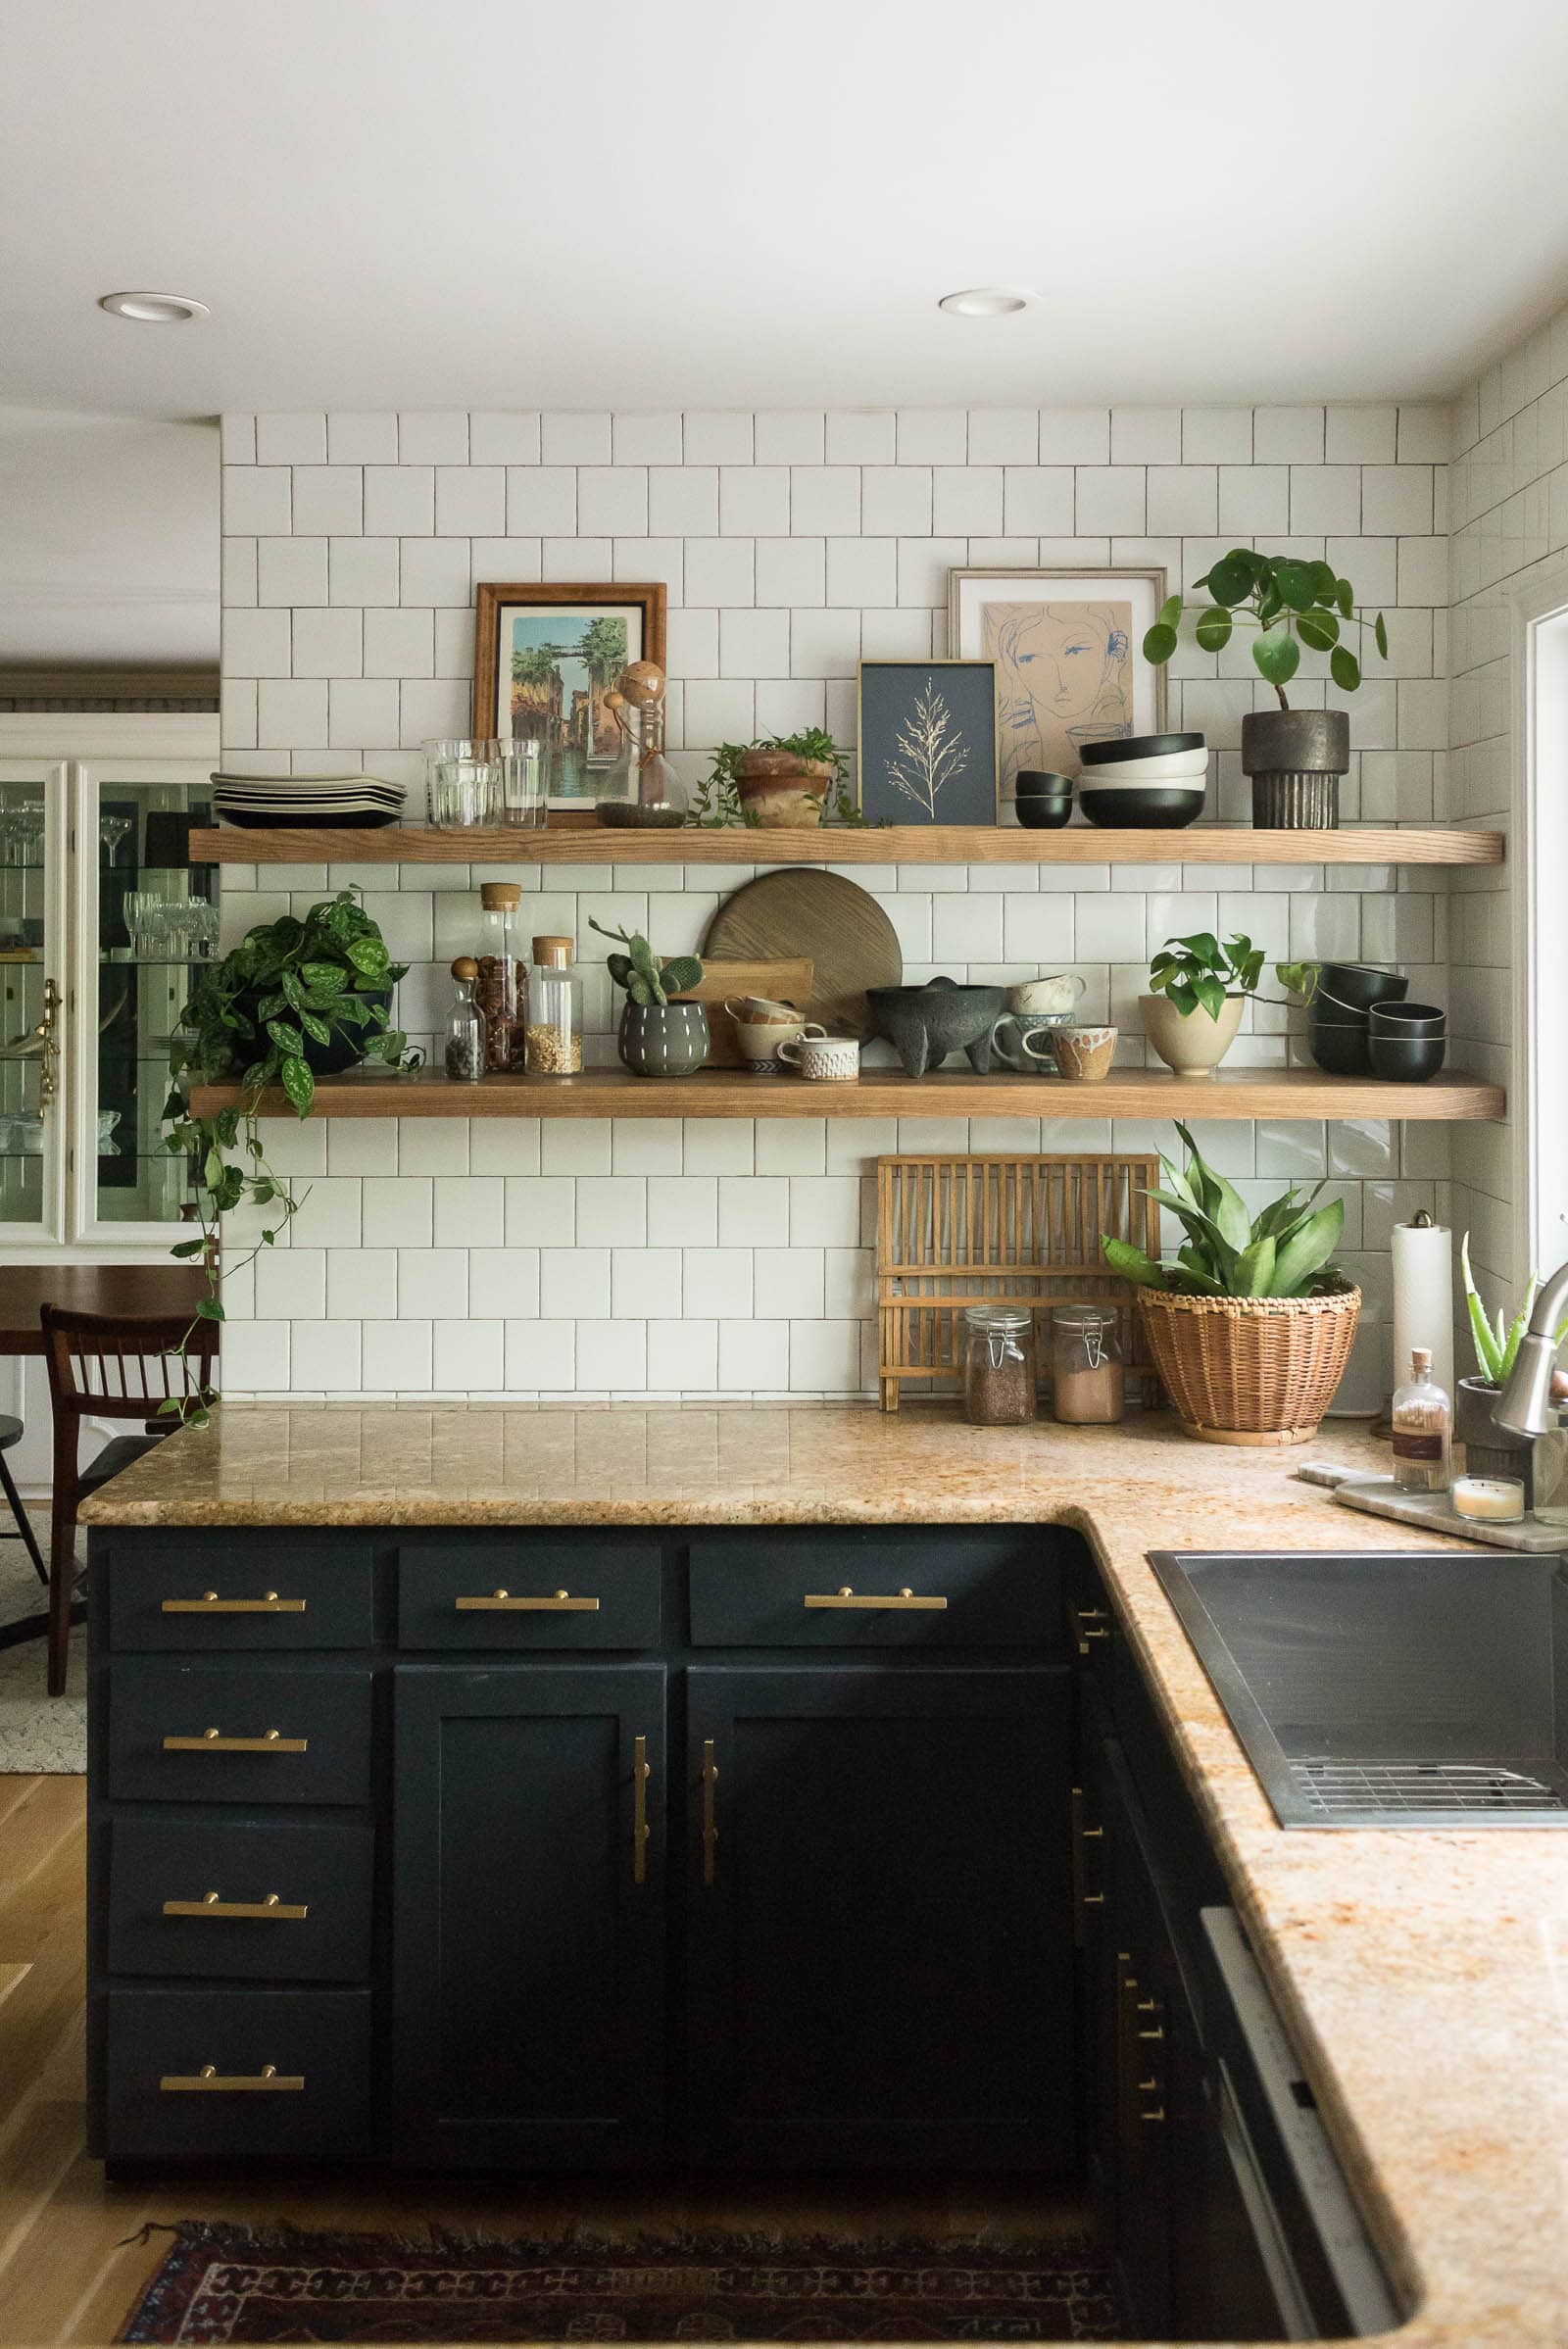 Cut Corners With The Kitchen Shelving, Granite Floating Shelves